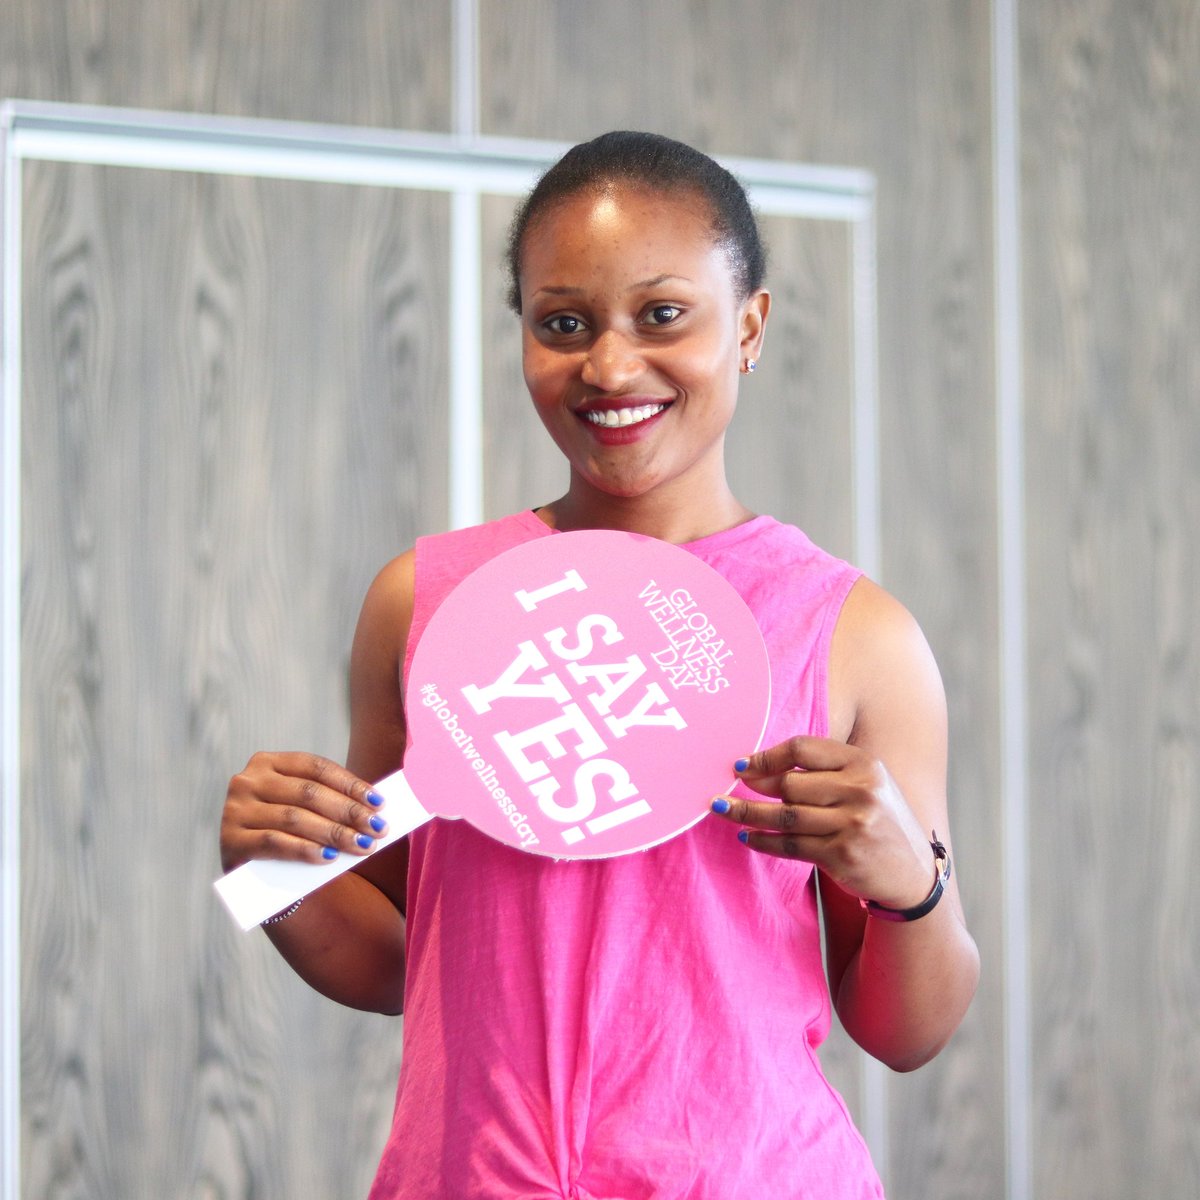 Only 2 weeks left to the big day! Have you gotten your squad ready for a fun filled health & wellness celebration at Trademark Hotel in Village Market? #june8th #savethedate #globalwellnessday #gwd2019  #globalwellnessdayke #healthmatters #freeyoga #freezumba #wellnesschecks